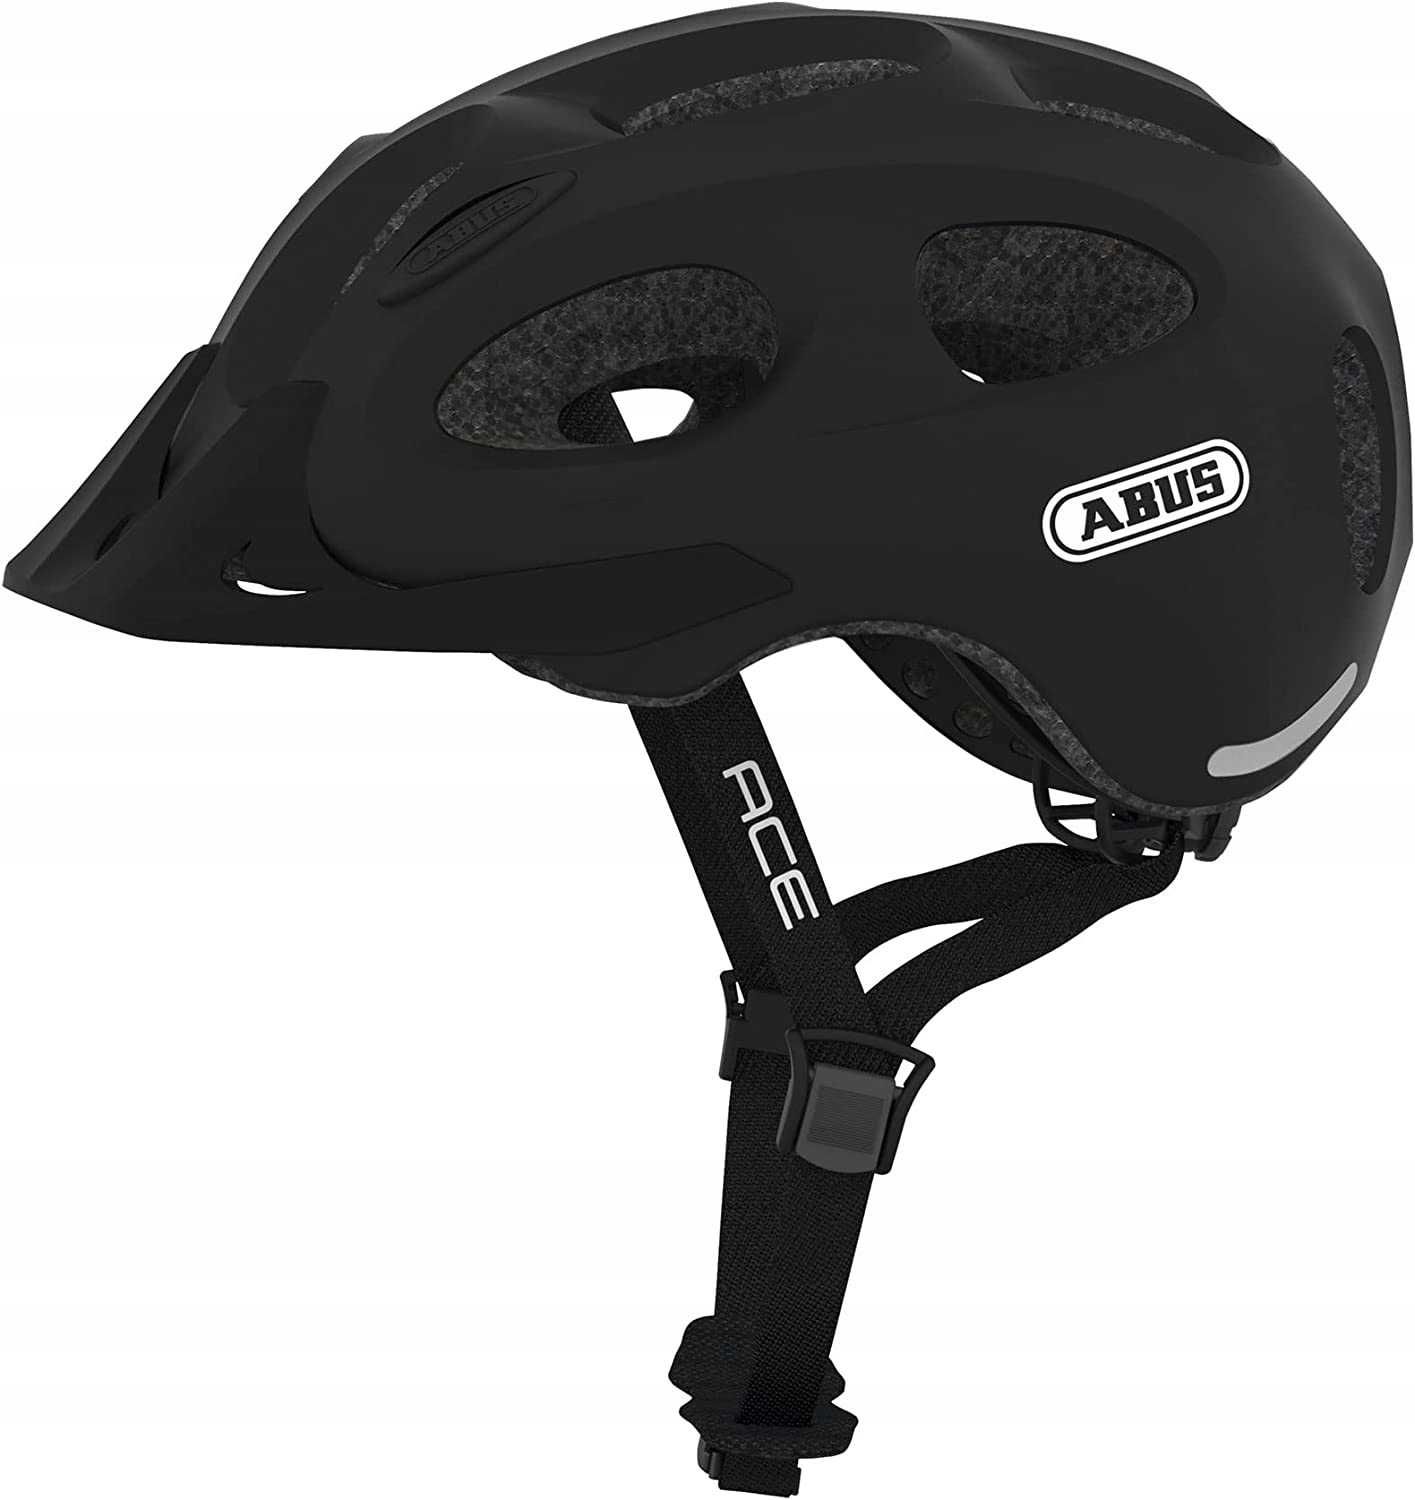 Kask rowerowy Abus Youn-I Ace r. M 52-57cm